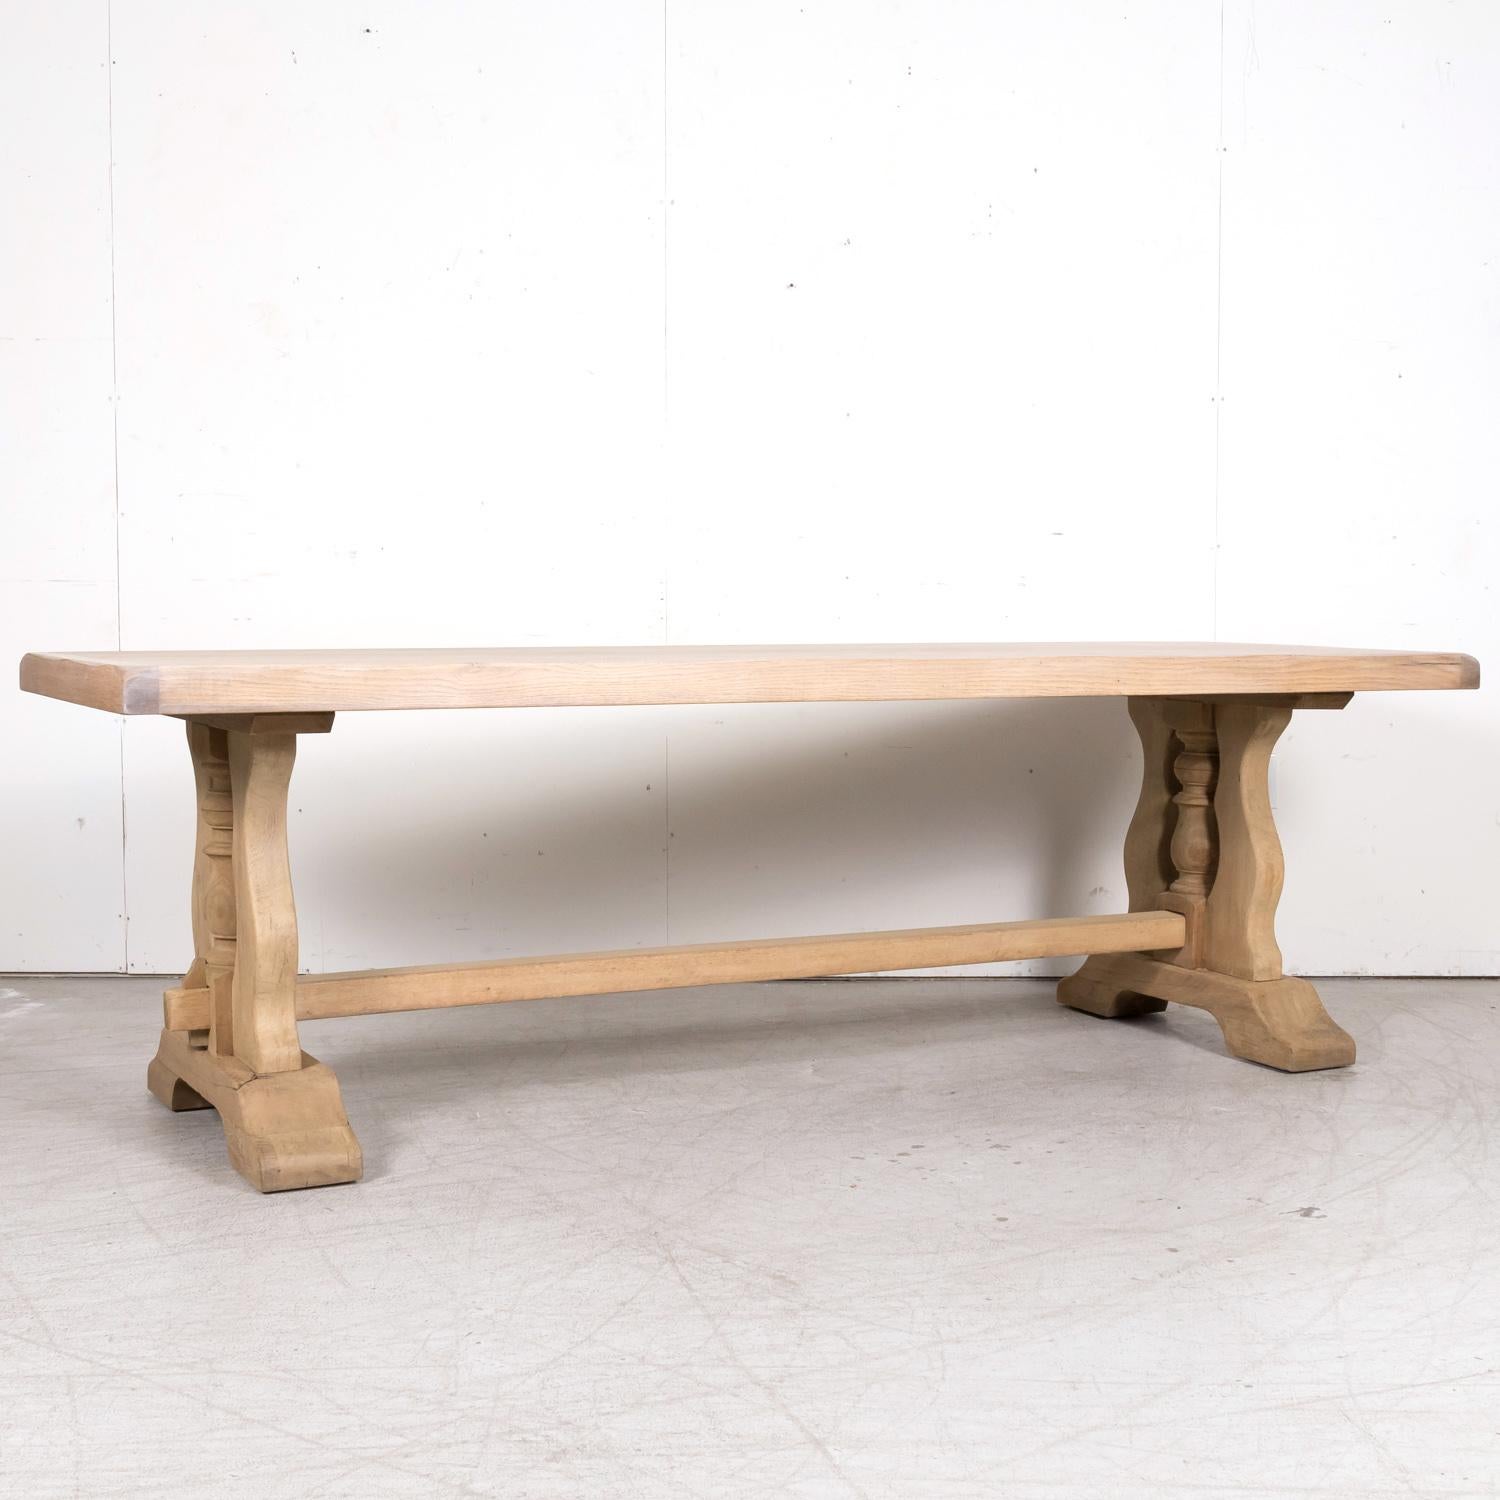 Early 20th Century Bleached Oak Antique French Monastery Table from Normandy For Sale 2